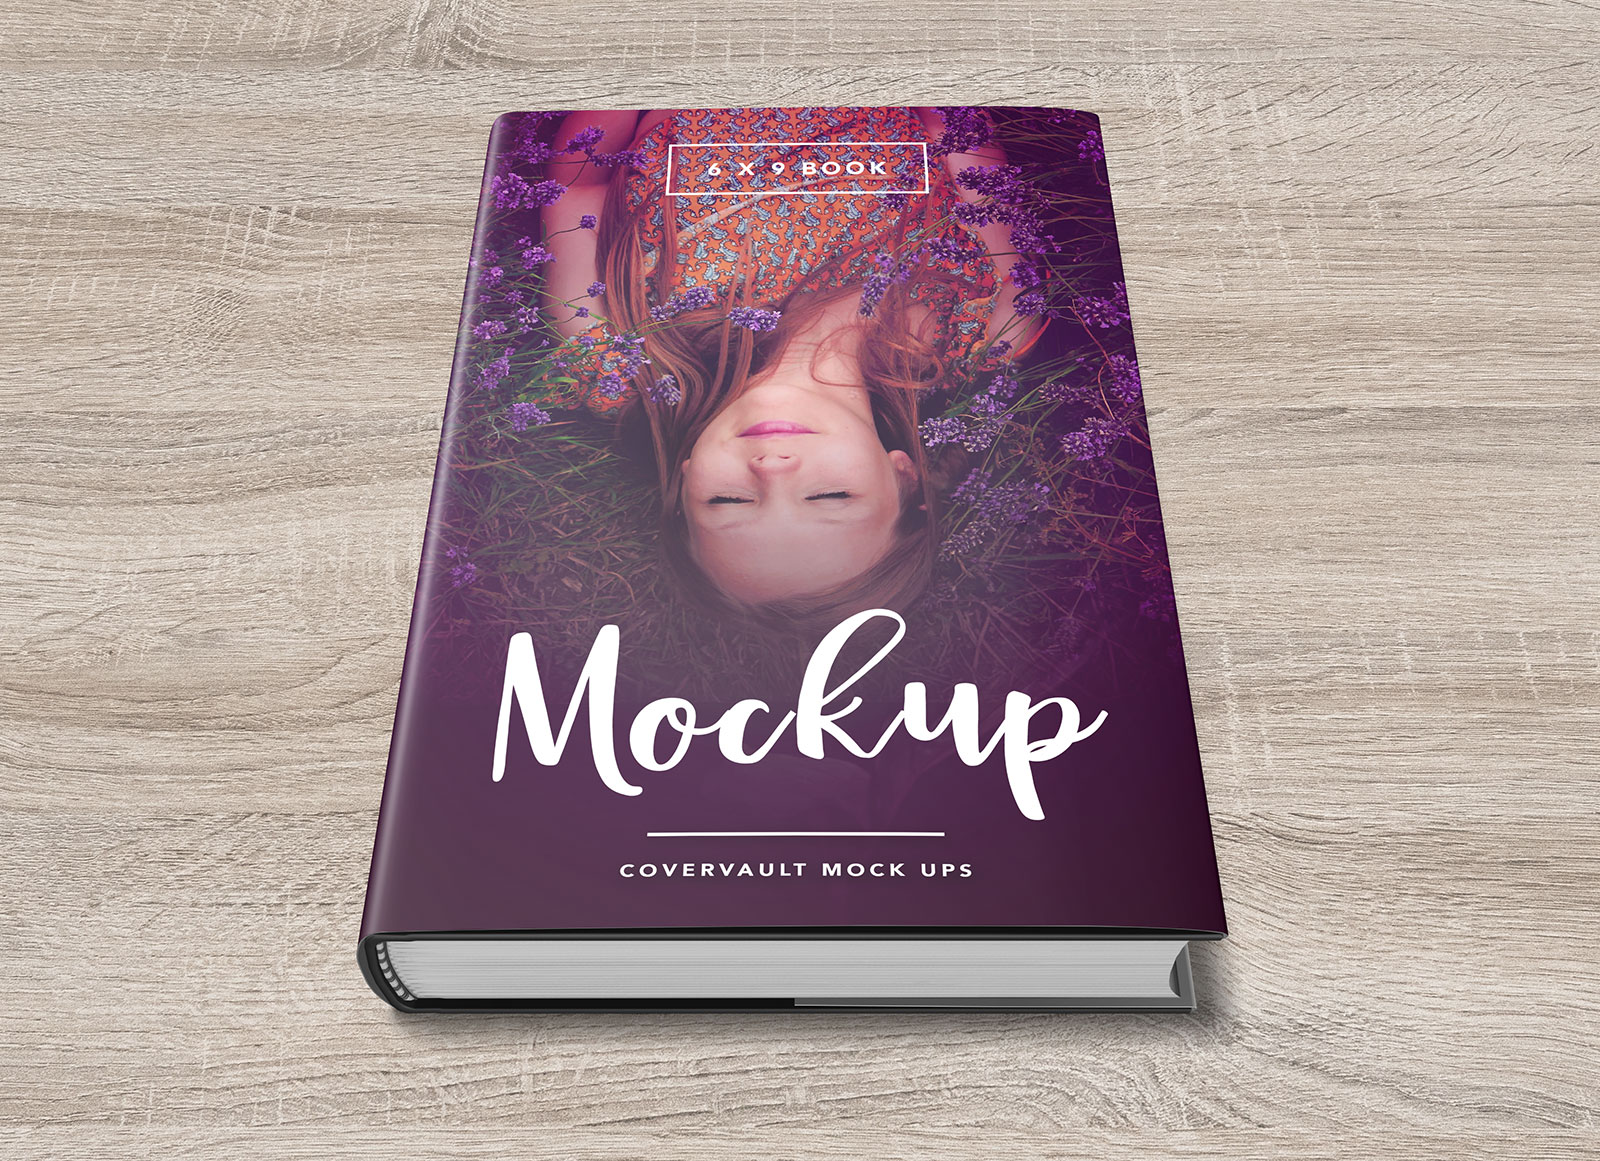 Hardcover Dust Jacket Book Mockup | Free PSD Templates